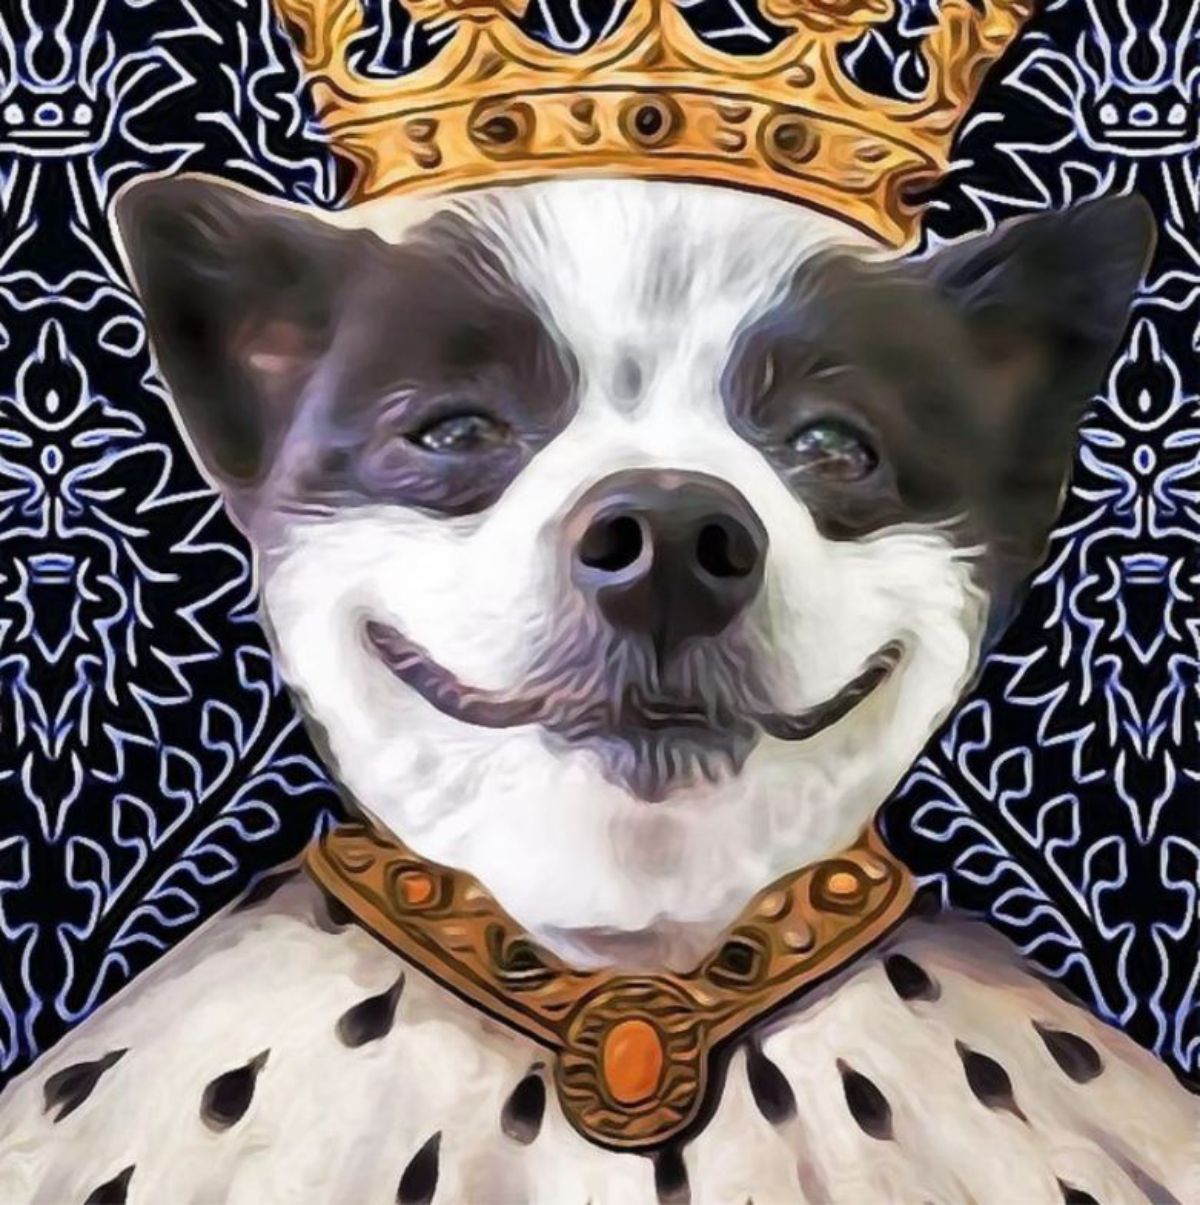 watercolour image of black and white dog who looks like he's smiling wearing a gold crown and royal robes